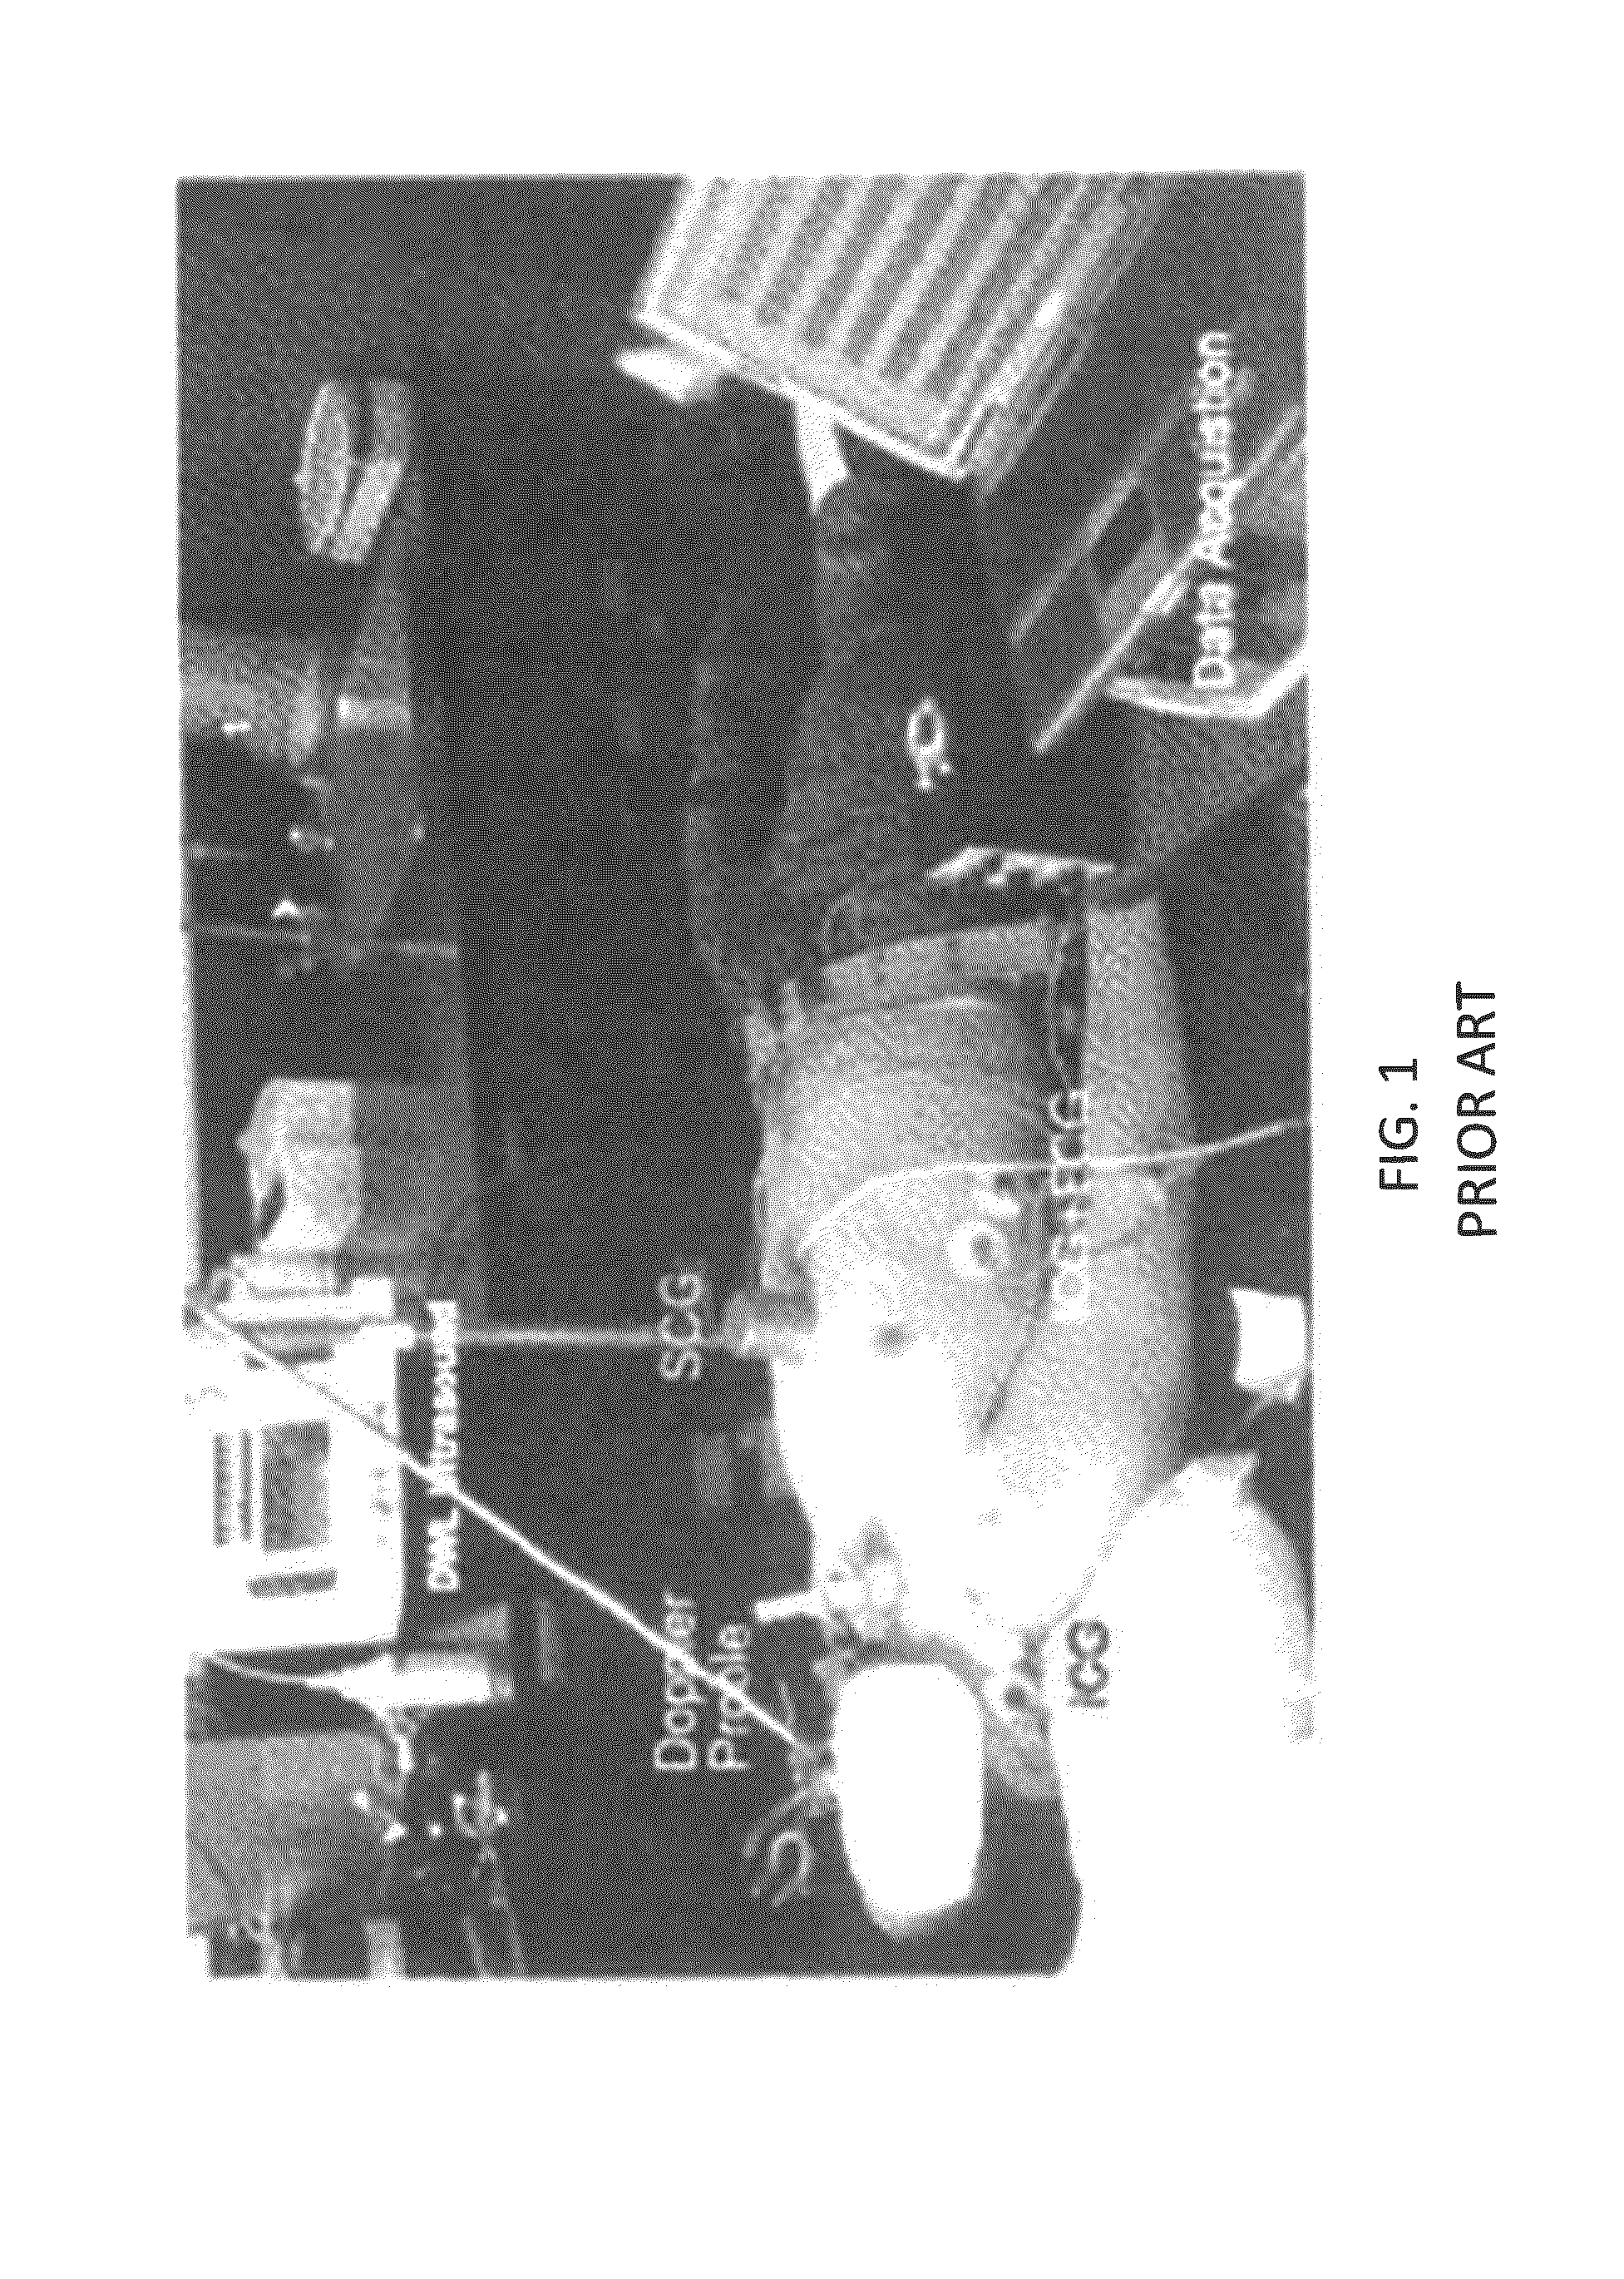 Cardiac performance monitoring system for use with mobile communications devices